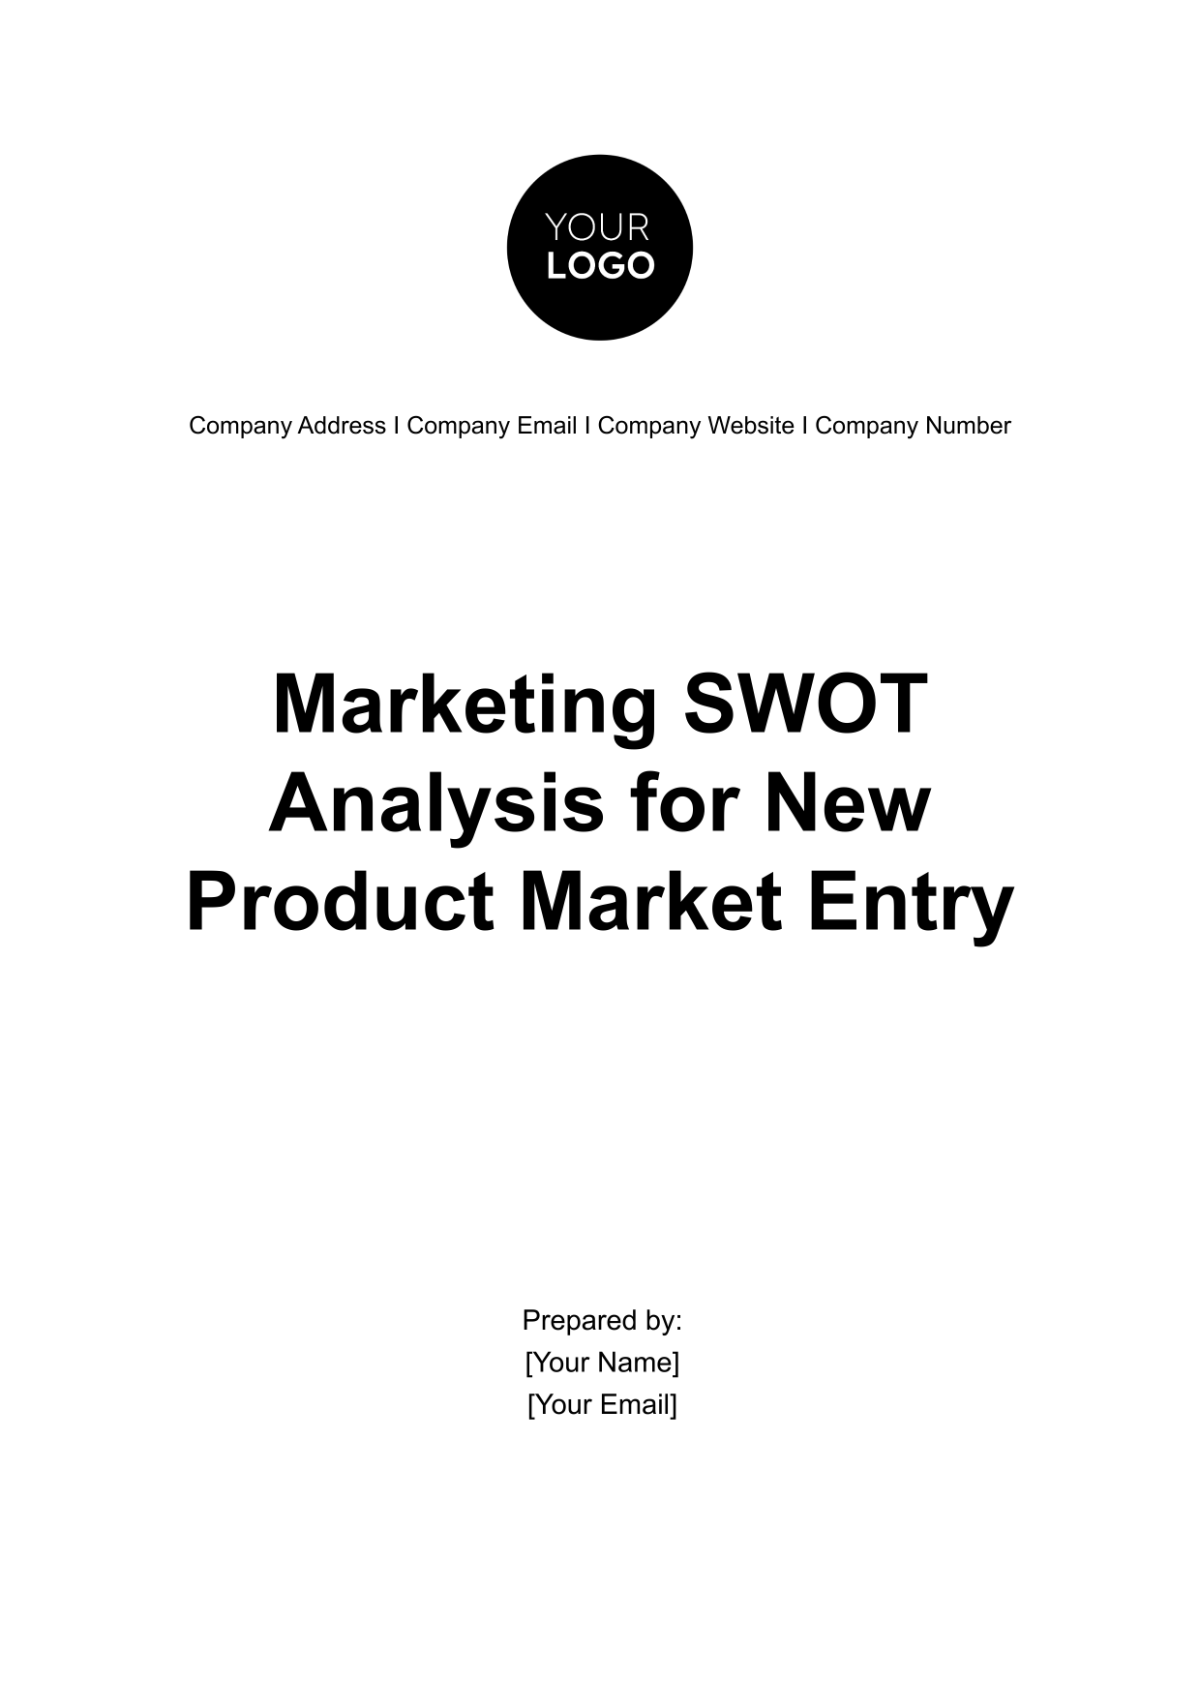 Marketing SWOT Analysis for New Product Market Entry Template